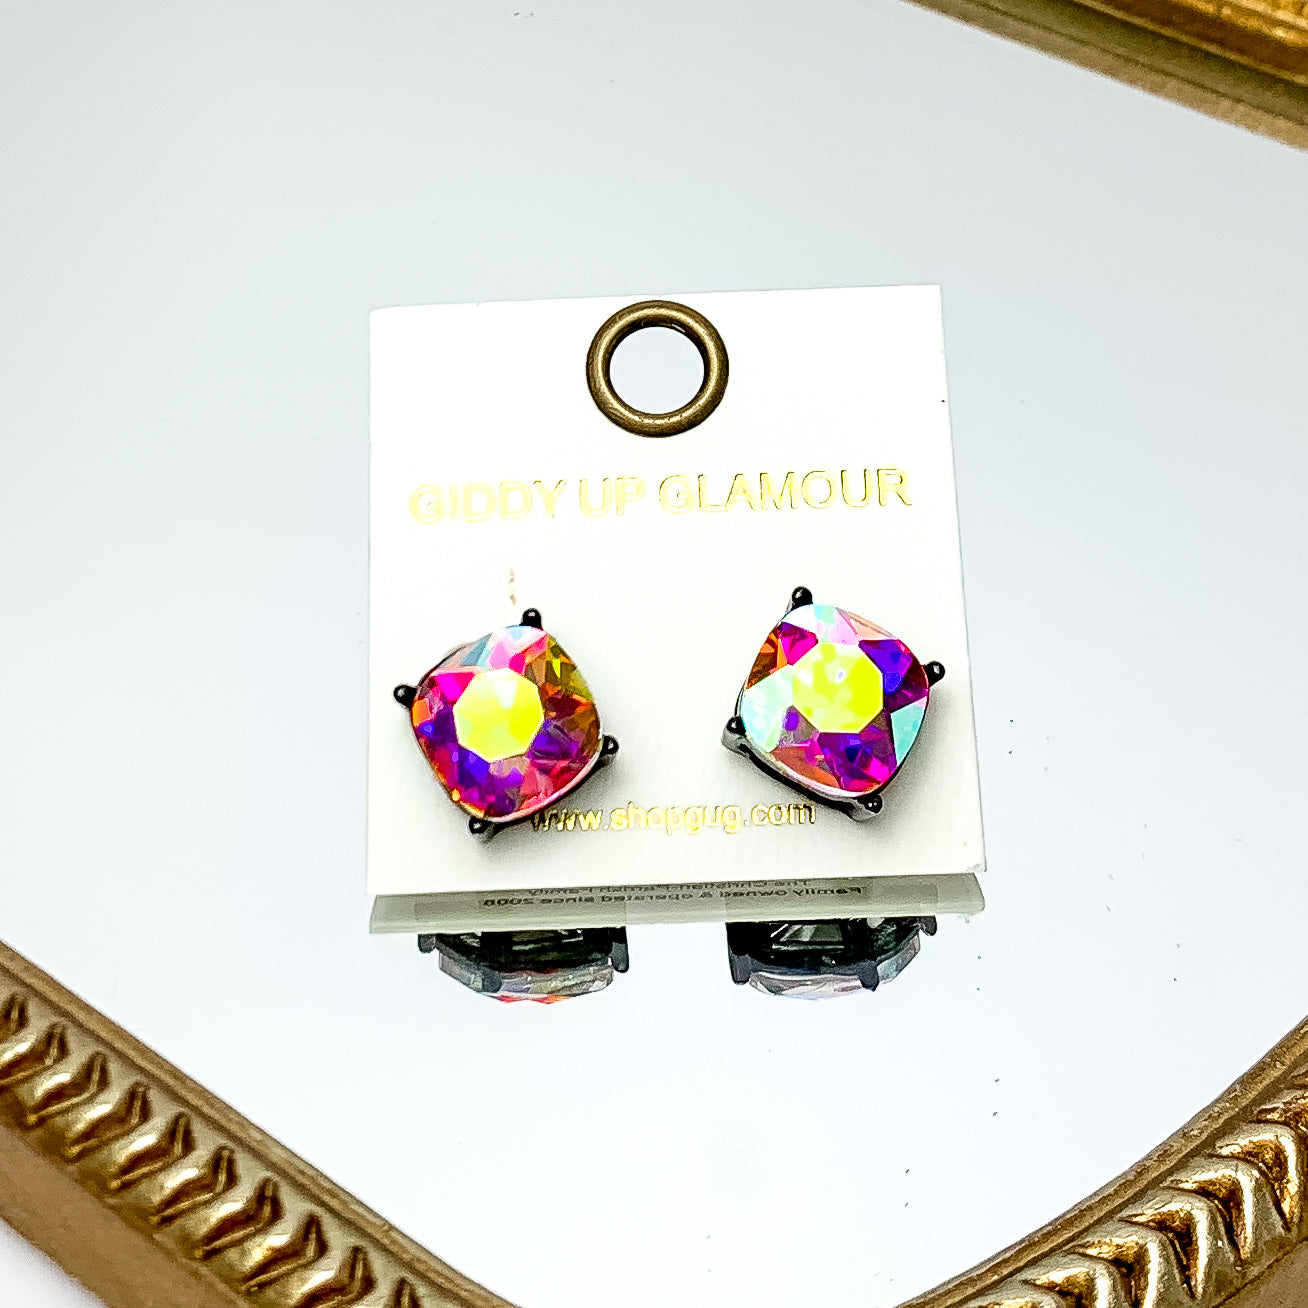 Large AB Crystal Stud Earrings in Silver Tone. These earrings are pictured laying on a gold trimmed mirror.